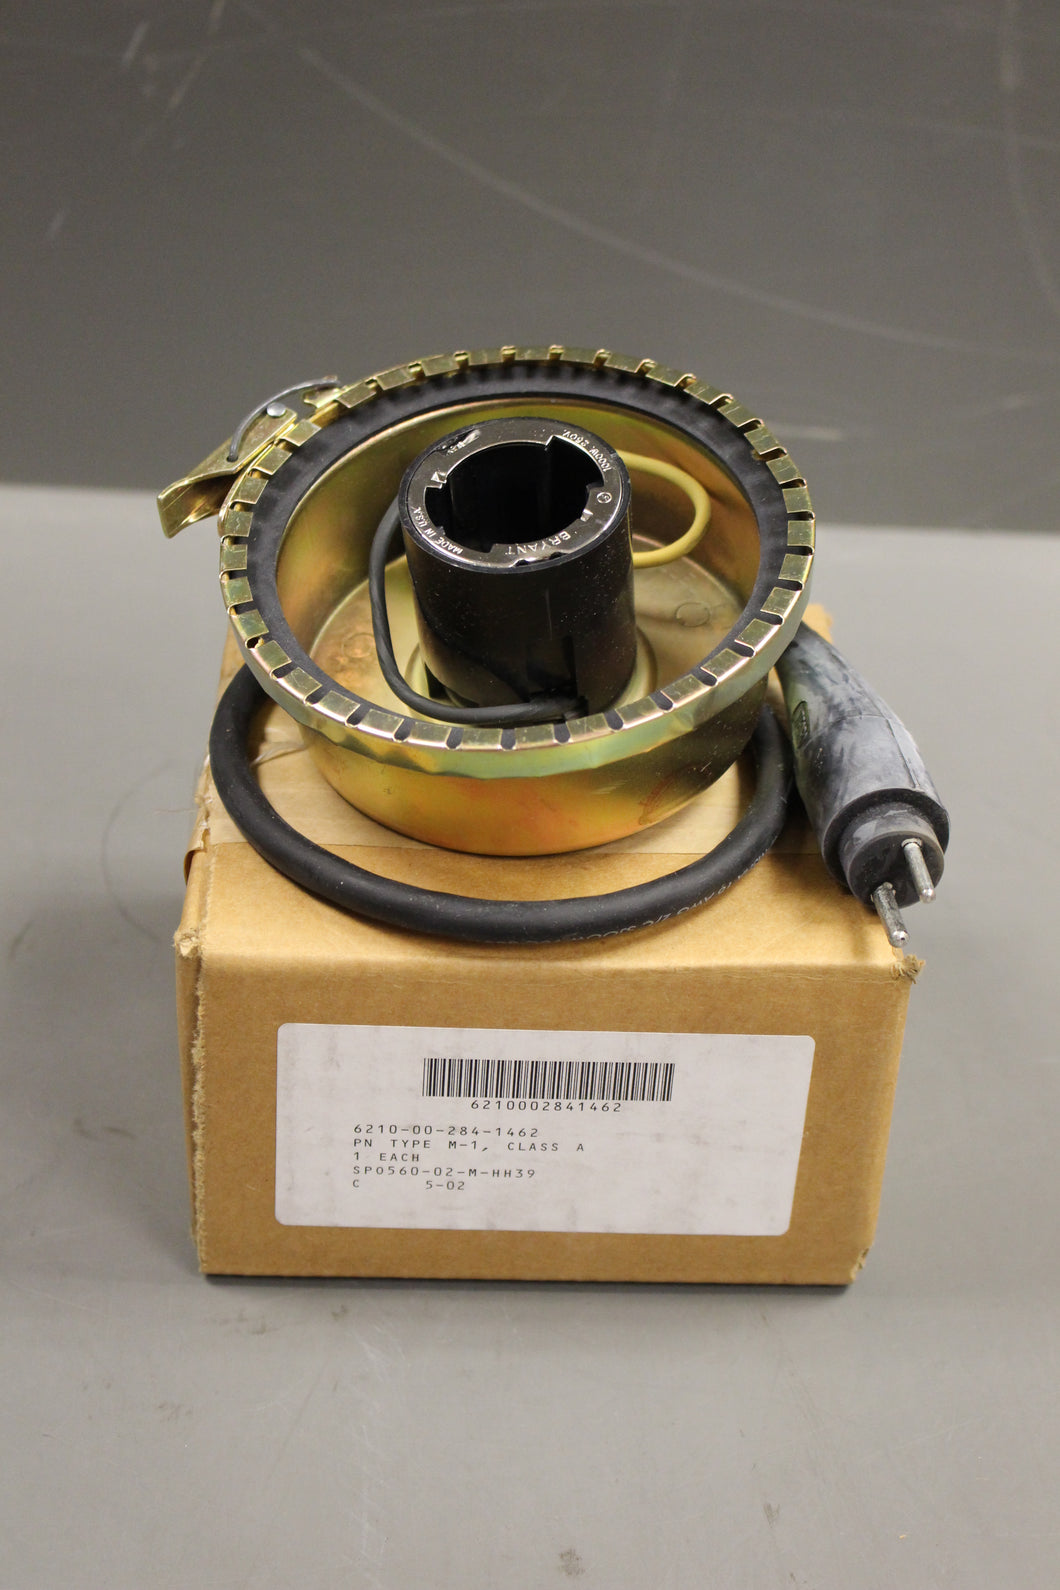 Fixture Assembly, 6210-00-284-1462, P/N 980-1, New!